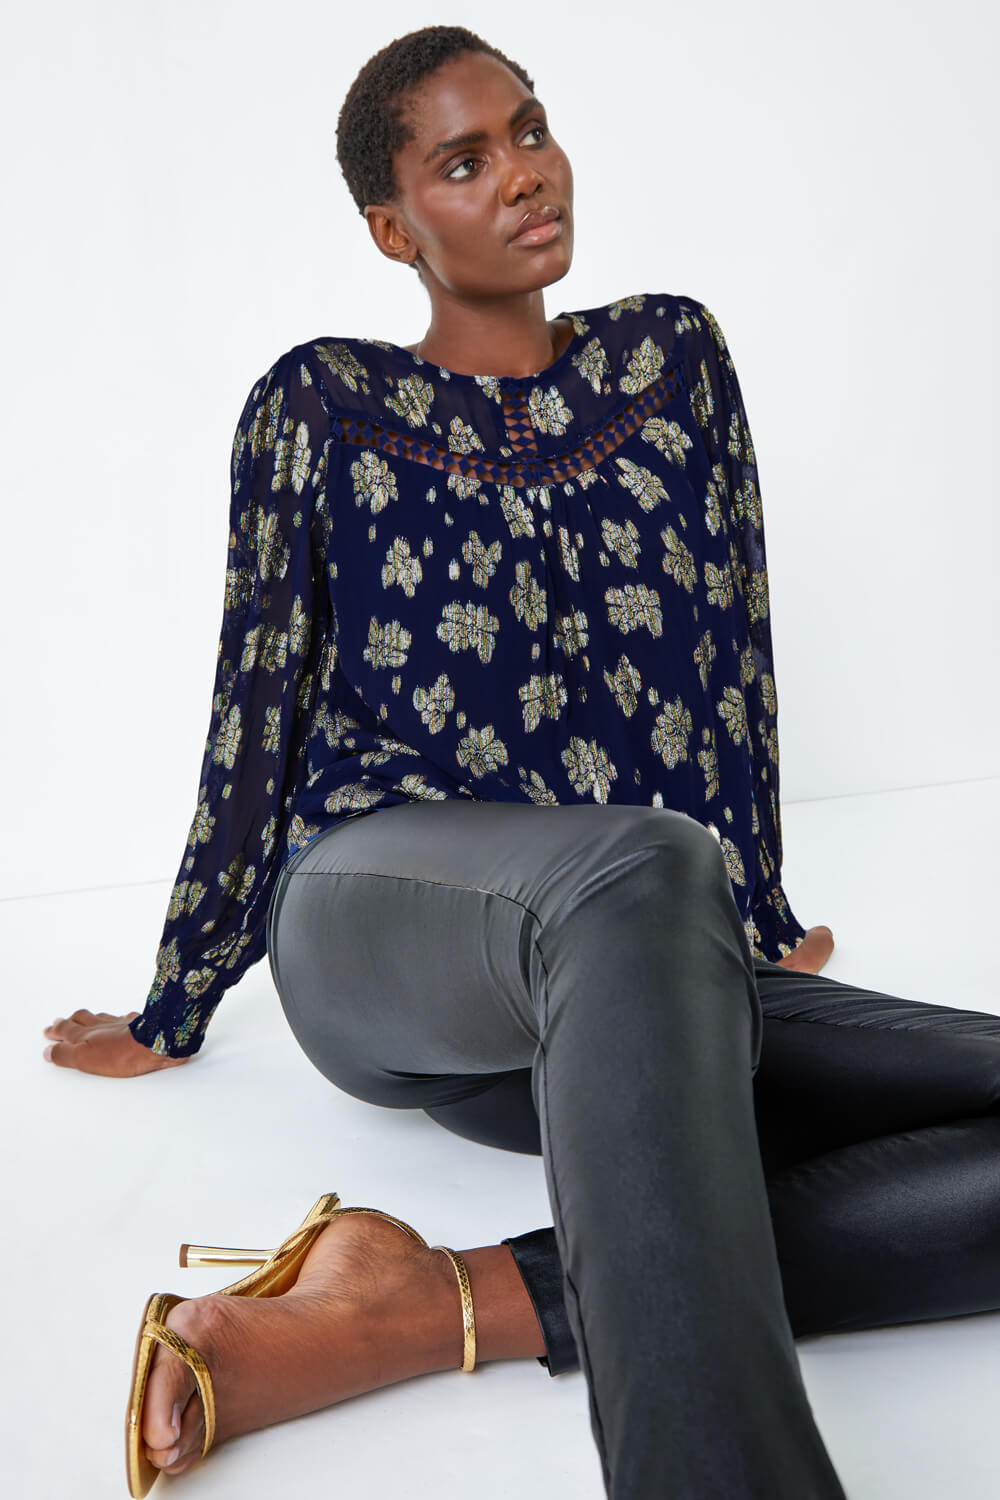 Midnight Blue Metallic Floral Print Ladder Lace Top, Image 5 of 5